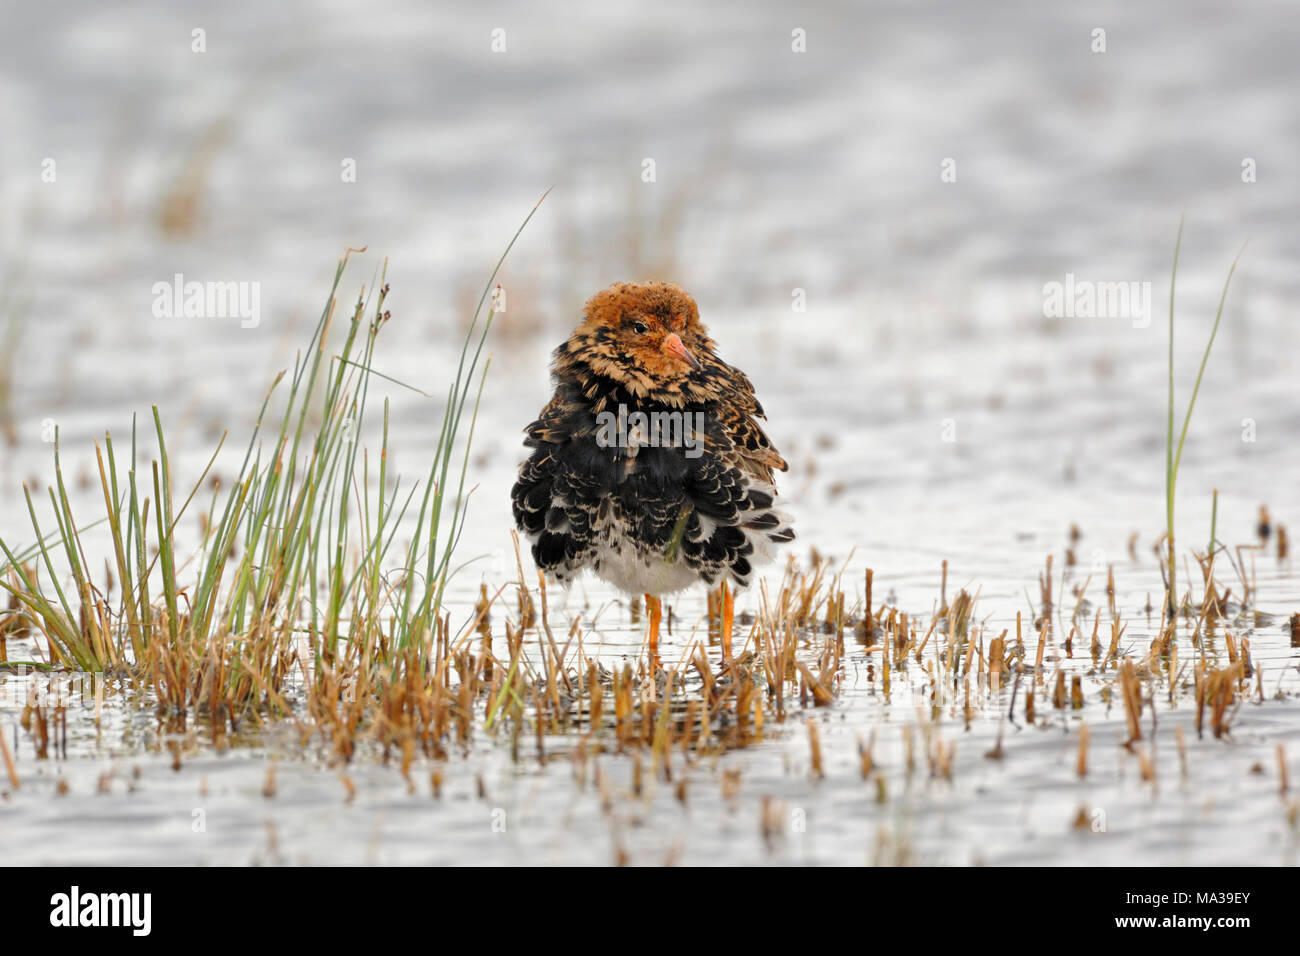 Ruff / Kampflaeufer ( Philomachus pugnax ) during spring migration, resting in shallow water, already in its breeding dress, wildlife, Europe. Stock Photo